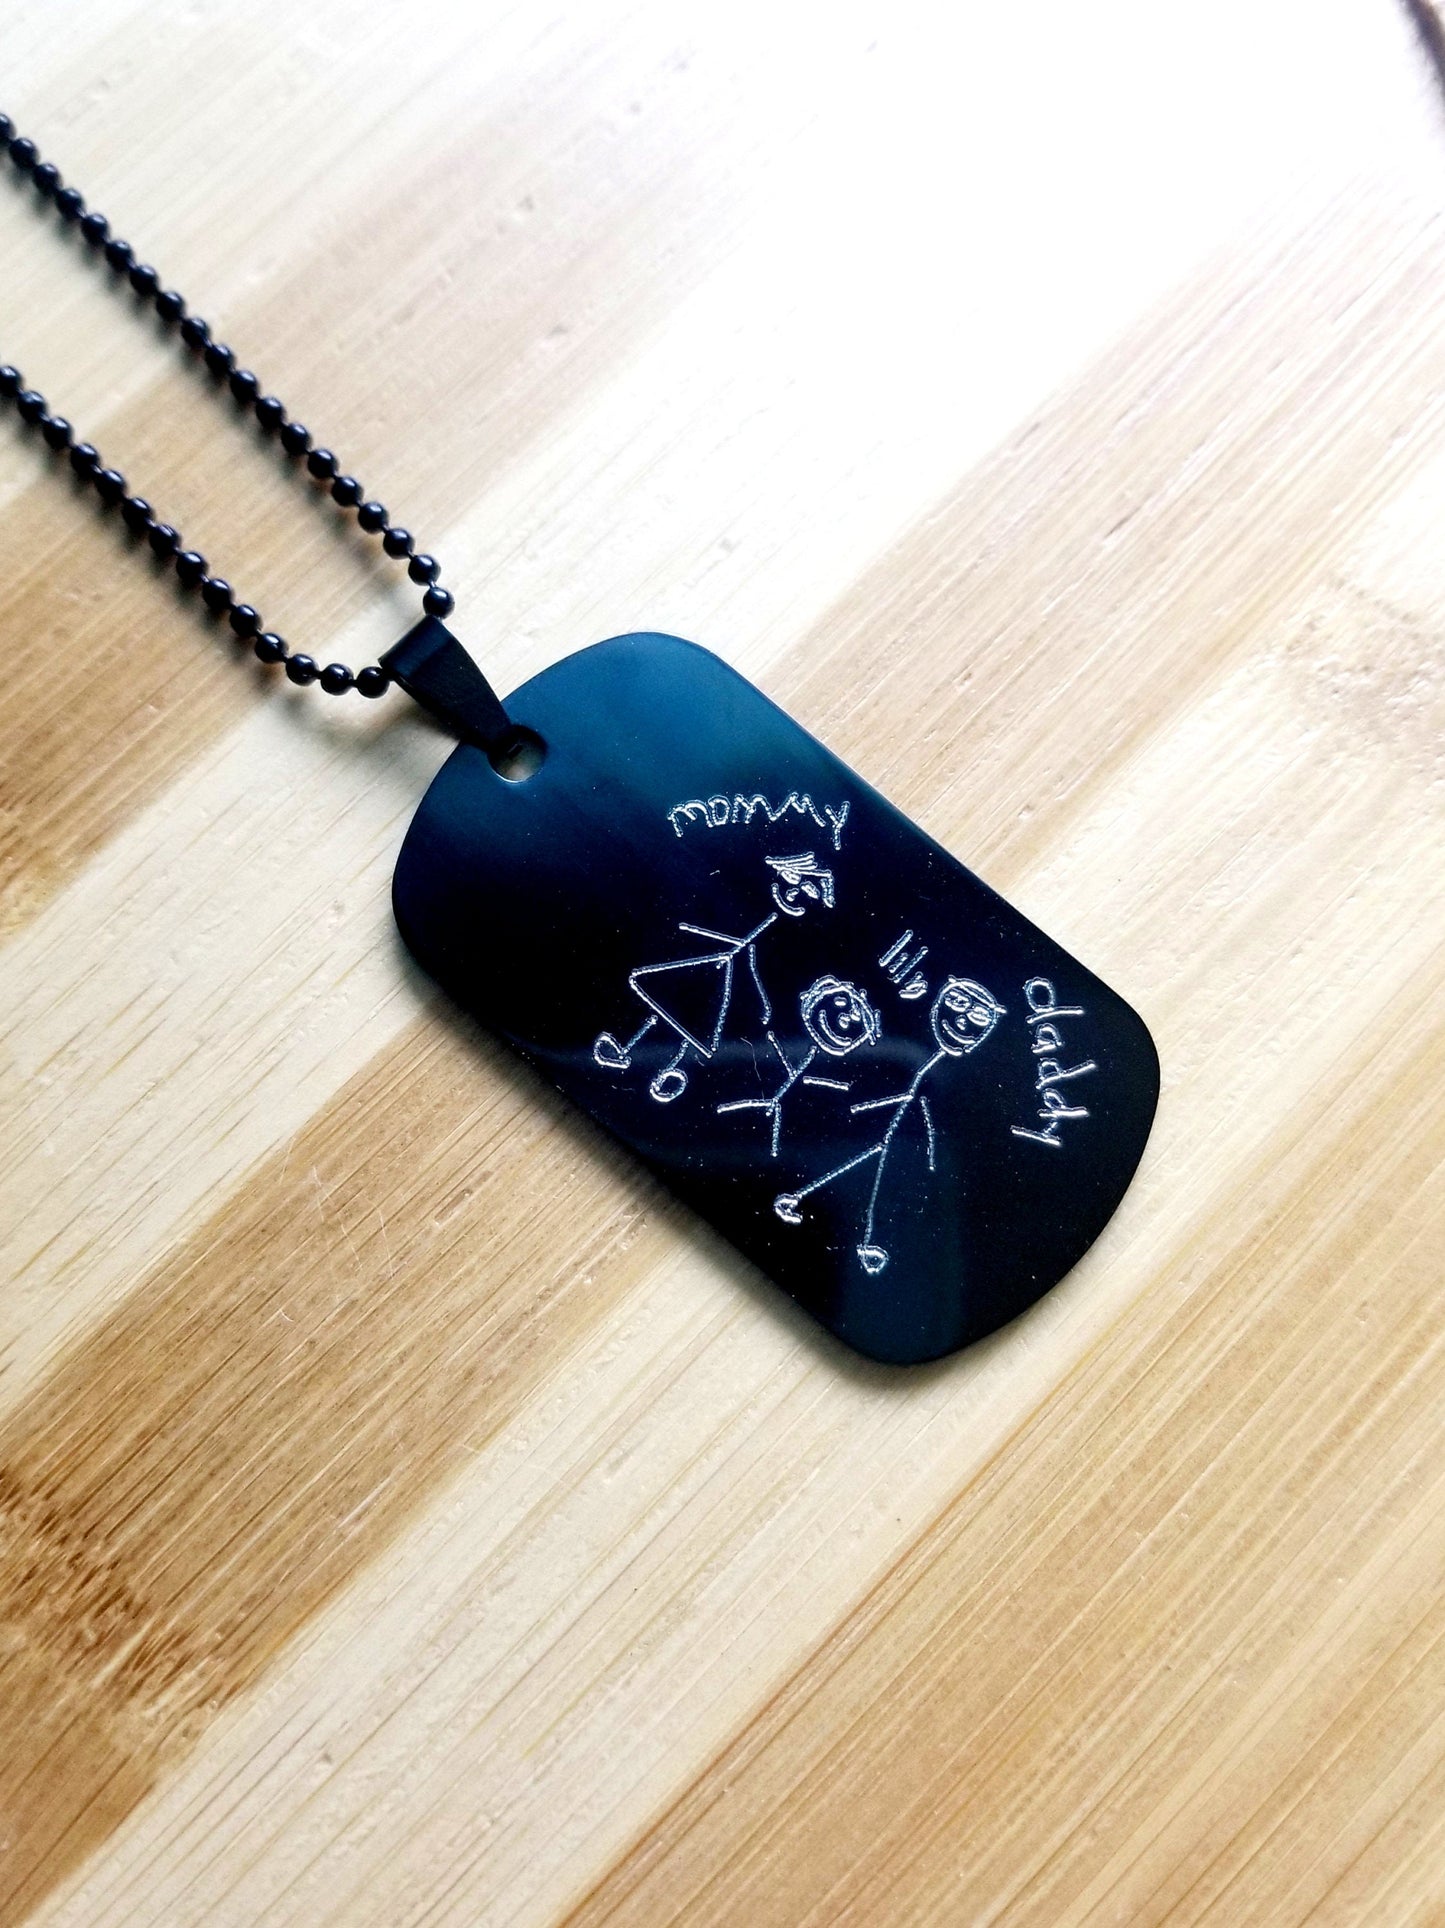 Black military tag necklace, child drawing necklace, Fathers day gift.